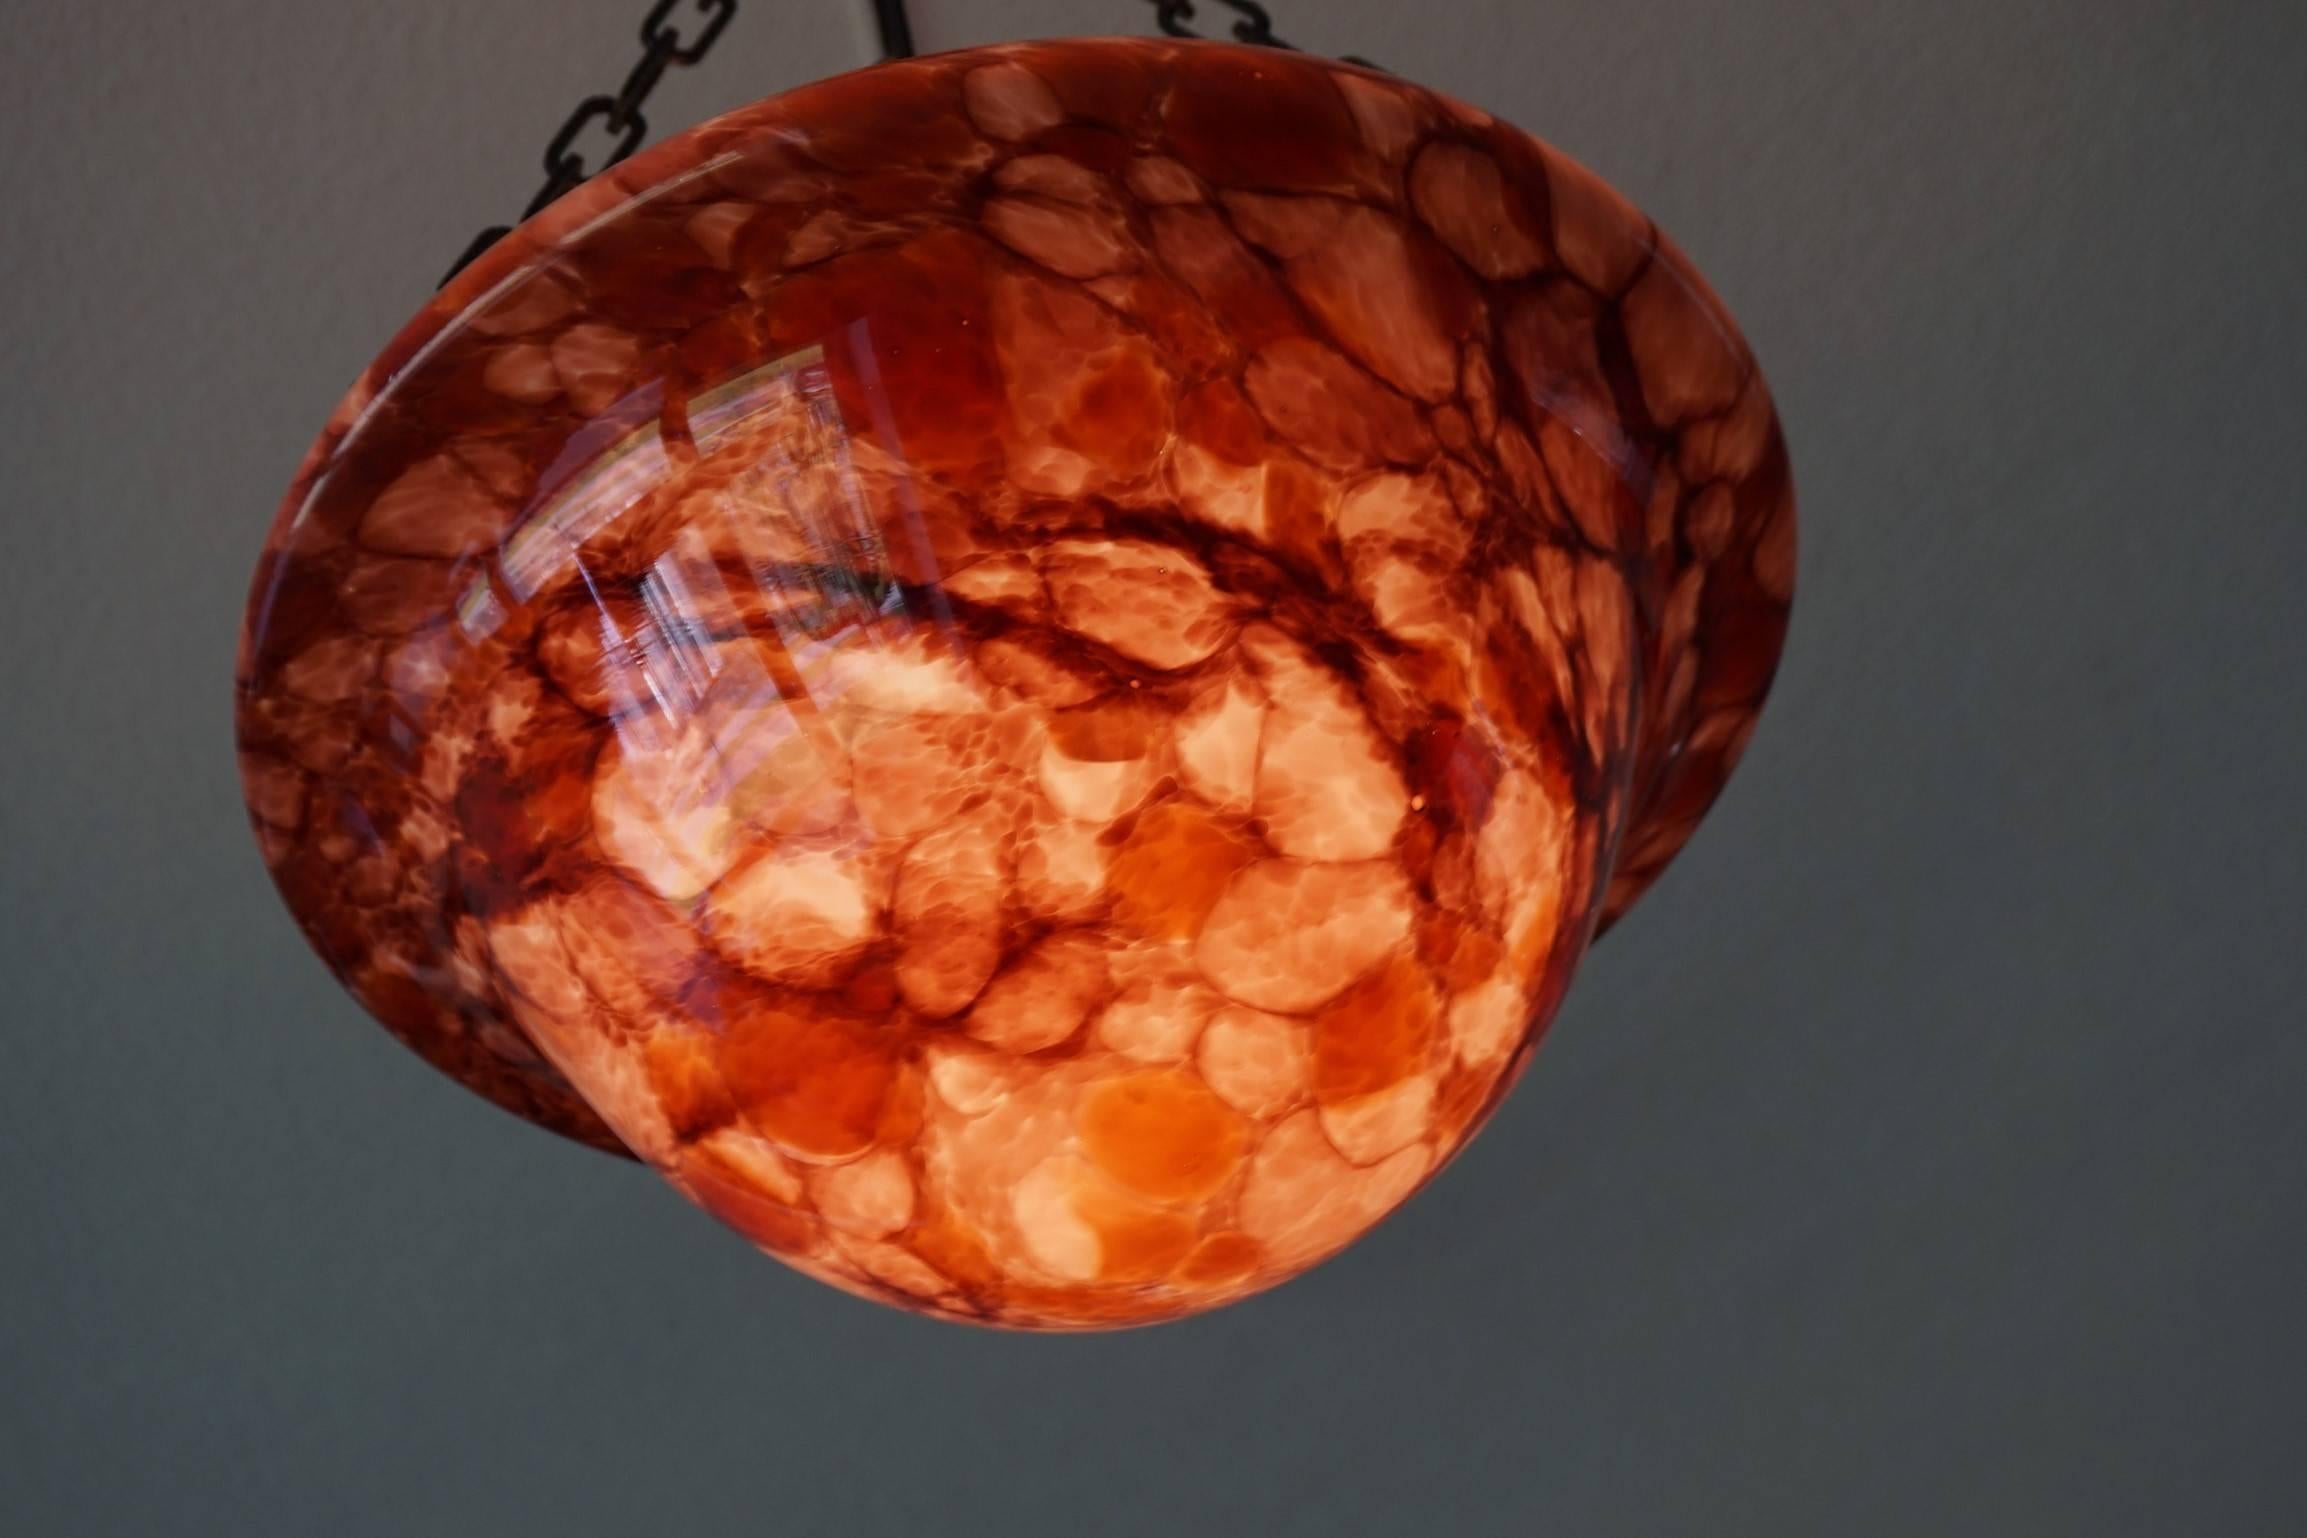 upside down ceiling lamp shade